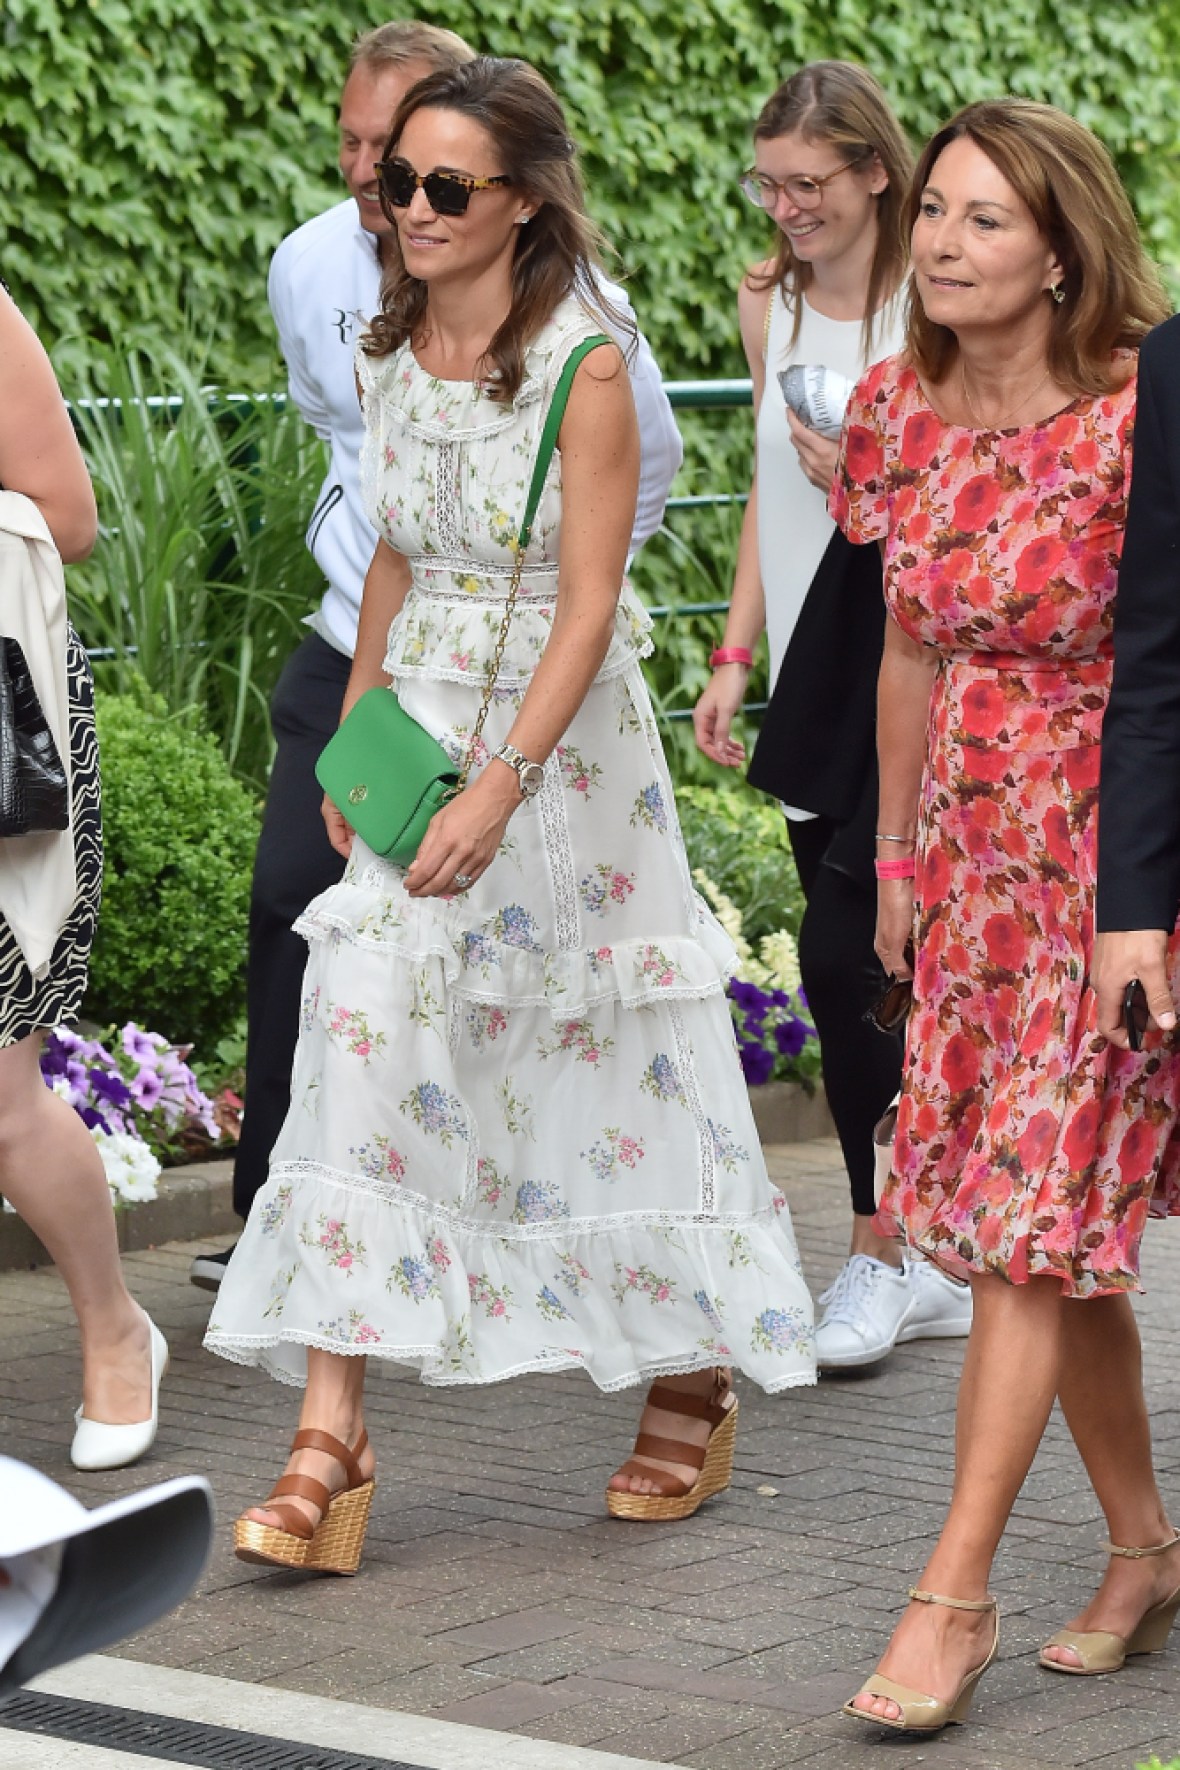 Pippa Middleton and Carole Middleton Excluded From Royal Box at Wimbledon